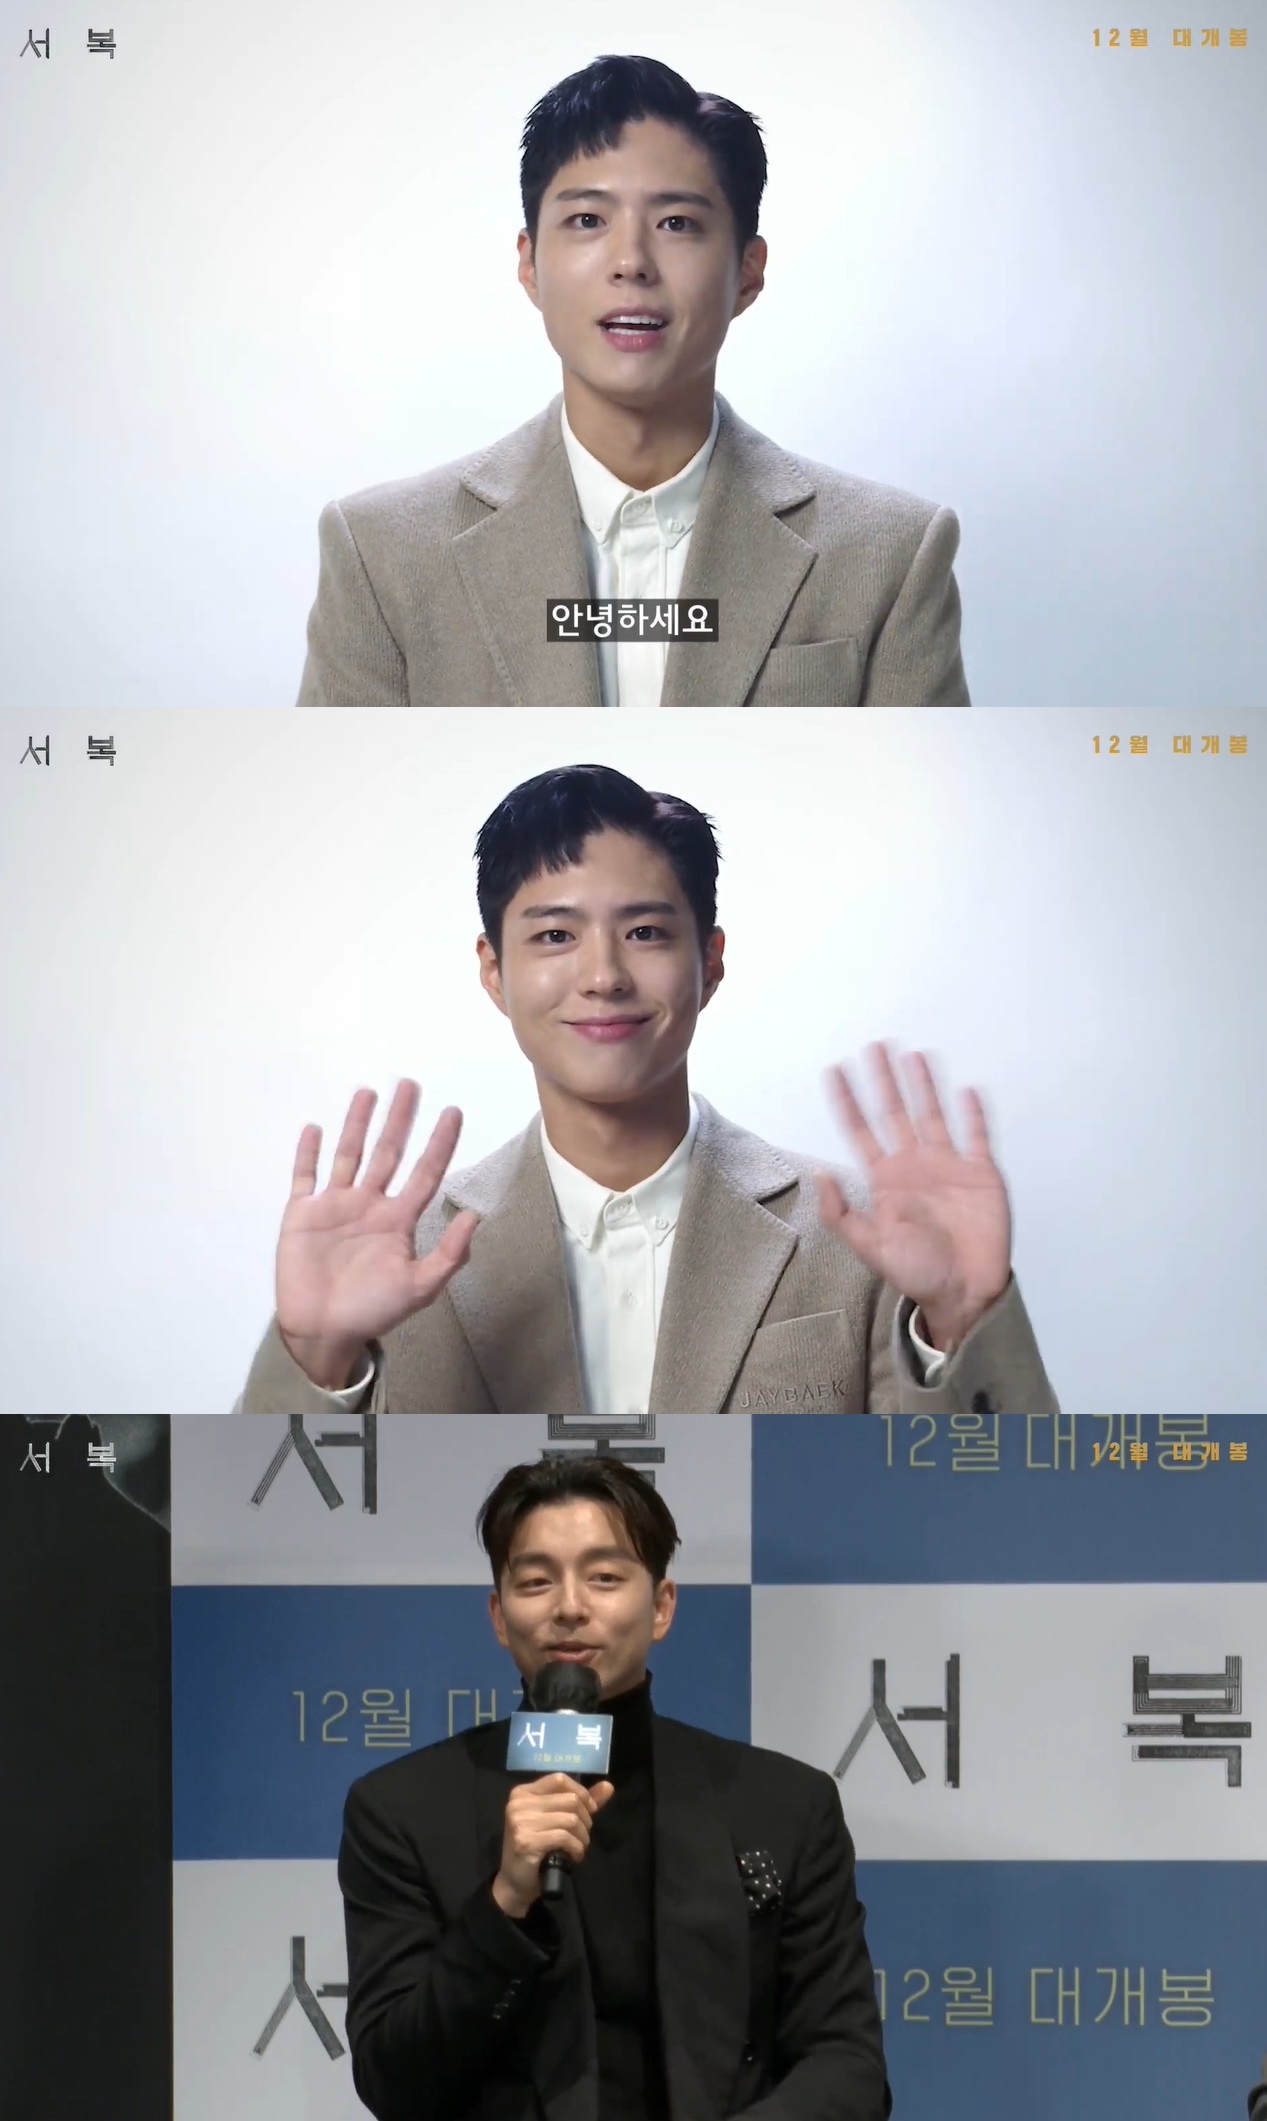 Seoul = = Actor Gong Yoooooo is pleased to hear Park Bo-gums video greetings.On the morning of the 27th, the film Seo Bok (director Lee Yong-ju) was held online production report, and director Gong Yooooo, Jo Woo-jin, Young-nam Jang and Lee Yong-ju attended.Park Bo-gum, who is serving in the military, said hello instead in the video.Park Bo-gum said, I greet you with a video in my heart that I can not do together today. After that, I thanked Lee Yong-ju, director Gong Yooooo, Jo Woo-jin, Young-nam Jang and Park Byung-eun for learning a lot.Many people have taken a lot of fun and meaning for Seo Bok, he said. I would like to ask Seo Bok.Gong Yoooooo said, I am resentful because I can not do it together, and I will not be able to see this in the army, but I will be suffering.Meanwhile, Seo Bok is a story that the intelligence agent who took the last task of transferring the first Duplicates Seo Bok to the secret secrets of mankind is caught up in an unexpected situation with a special companion in the pursuit of various forces aiming for Seo Bok.Gong Yoooooo divides former intelligence agent Giheon and Park Bo-gum divides into Duplicates Seo Bok.Jo Woo-jin plays the role of the intelligence agent Ahn, who is trying to conceal the identity of Seo Bok, and Young-nam Jang is the responsible researcher who watched the birth and growth of Seo Bok.It will be released in December.